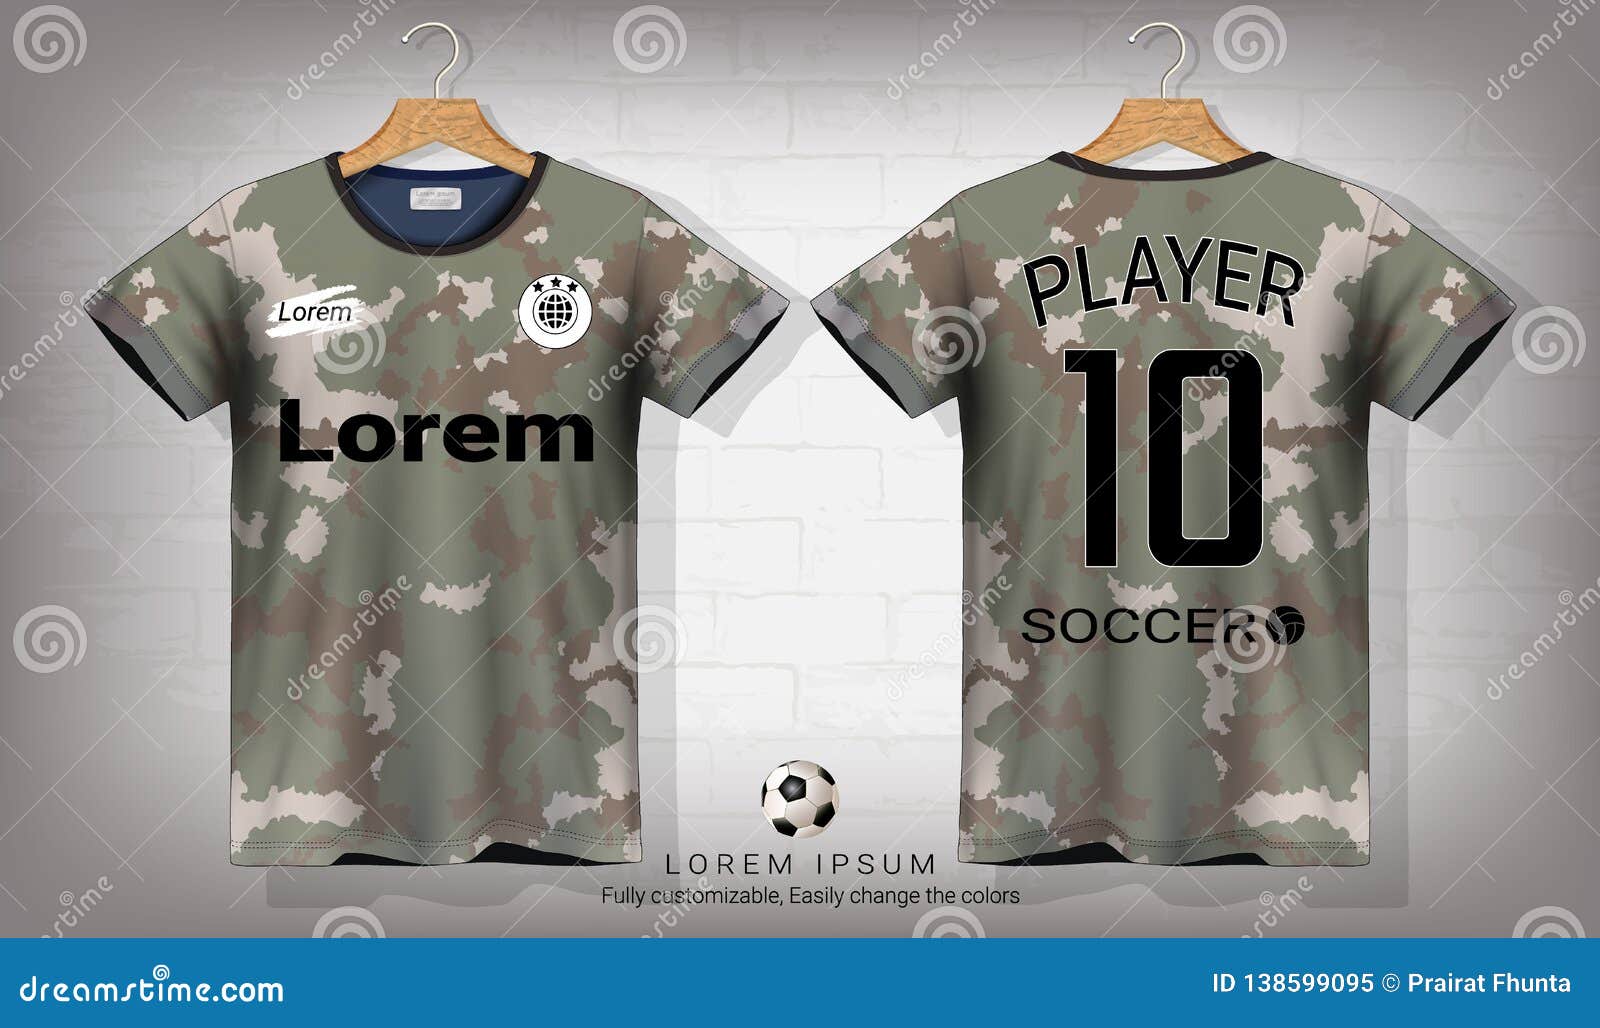 Soccer Jersey and T-shirt Sport Mockup Template, Graphic Design for ...